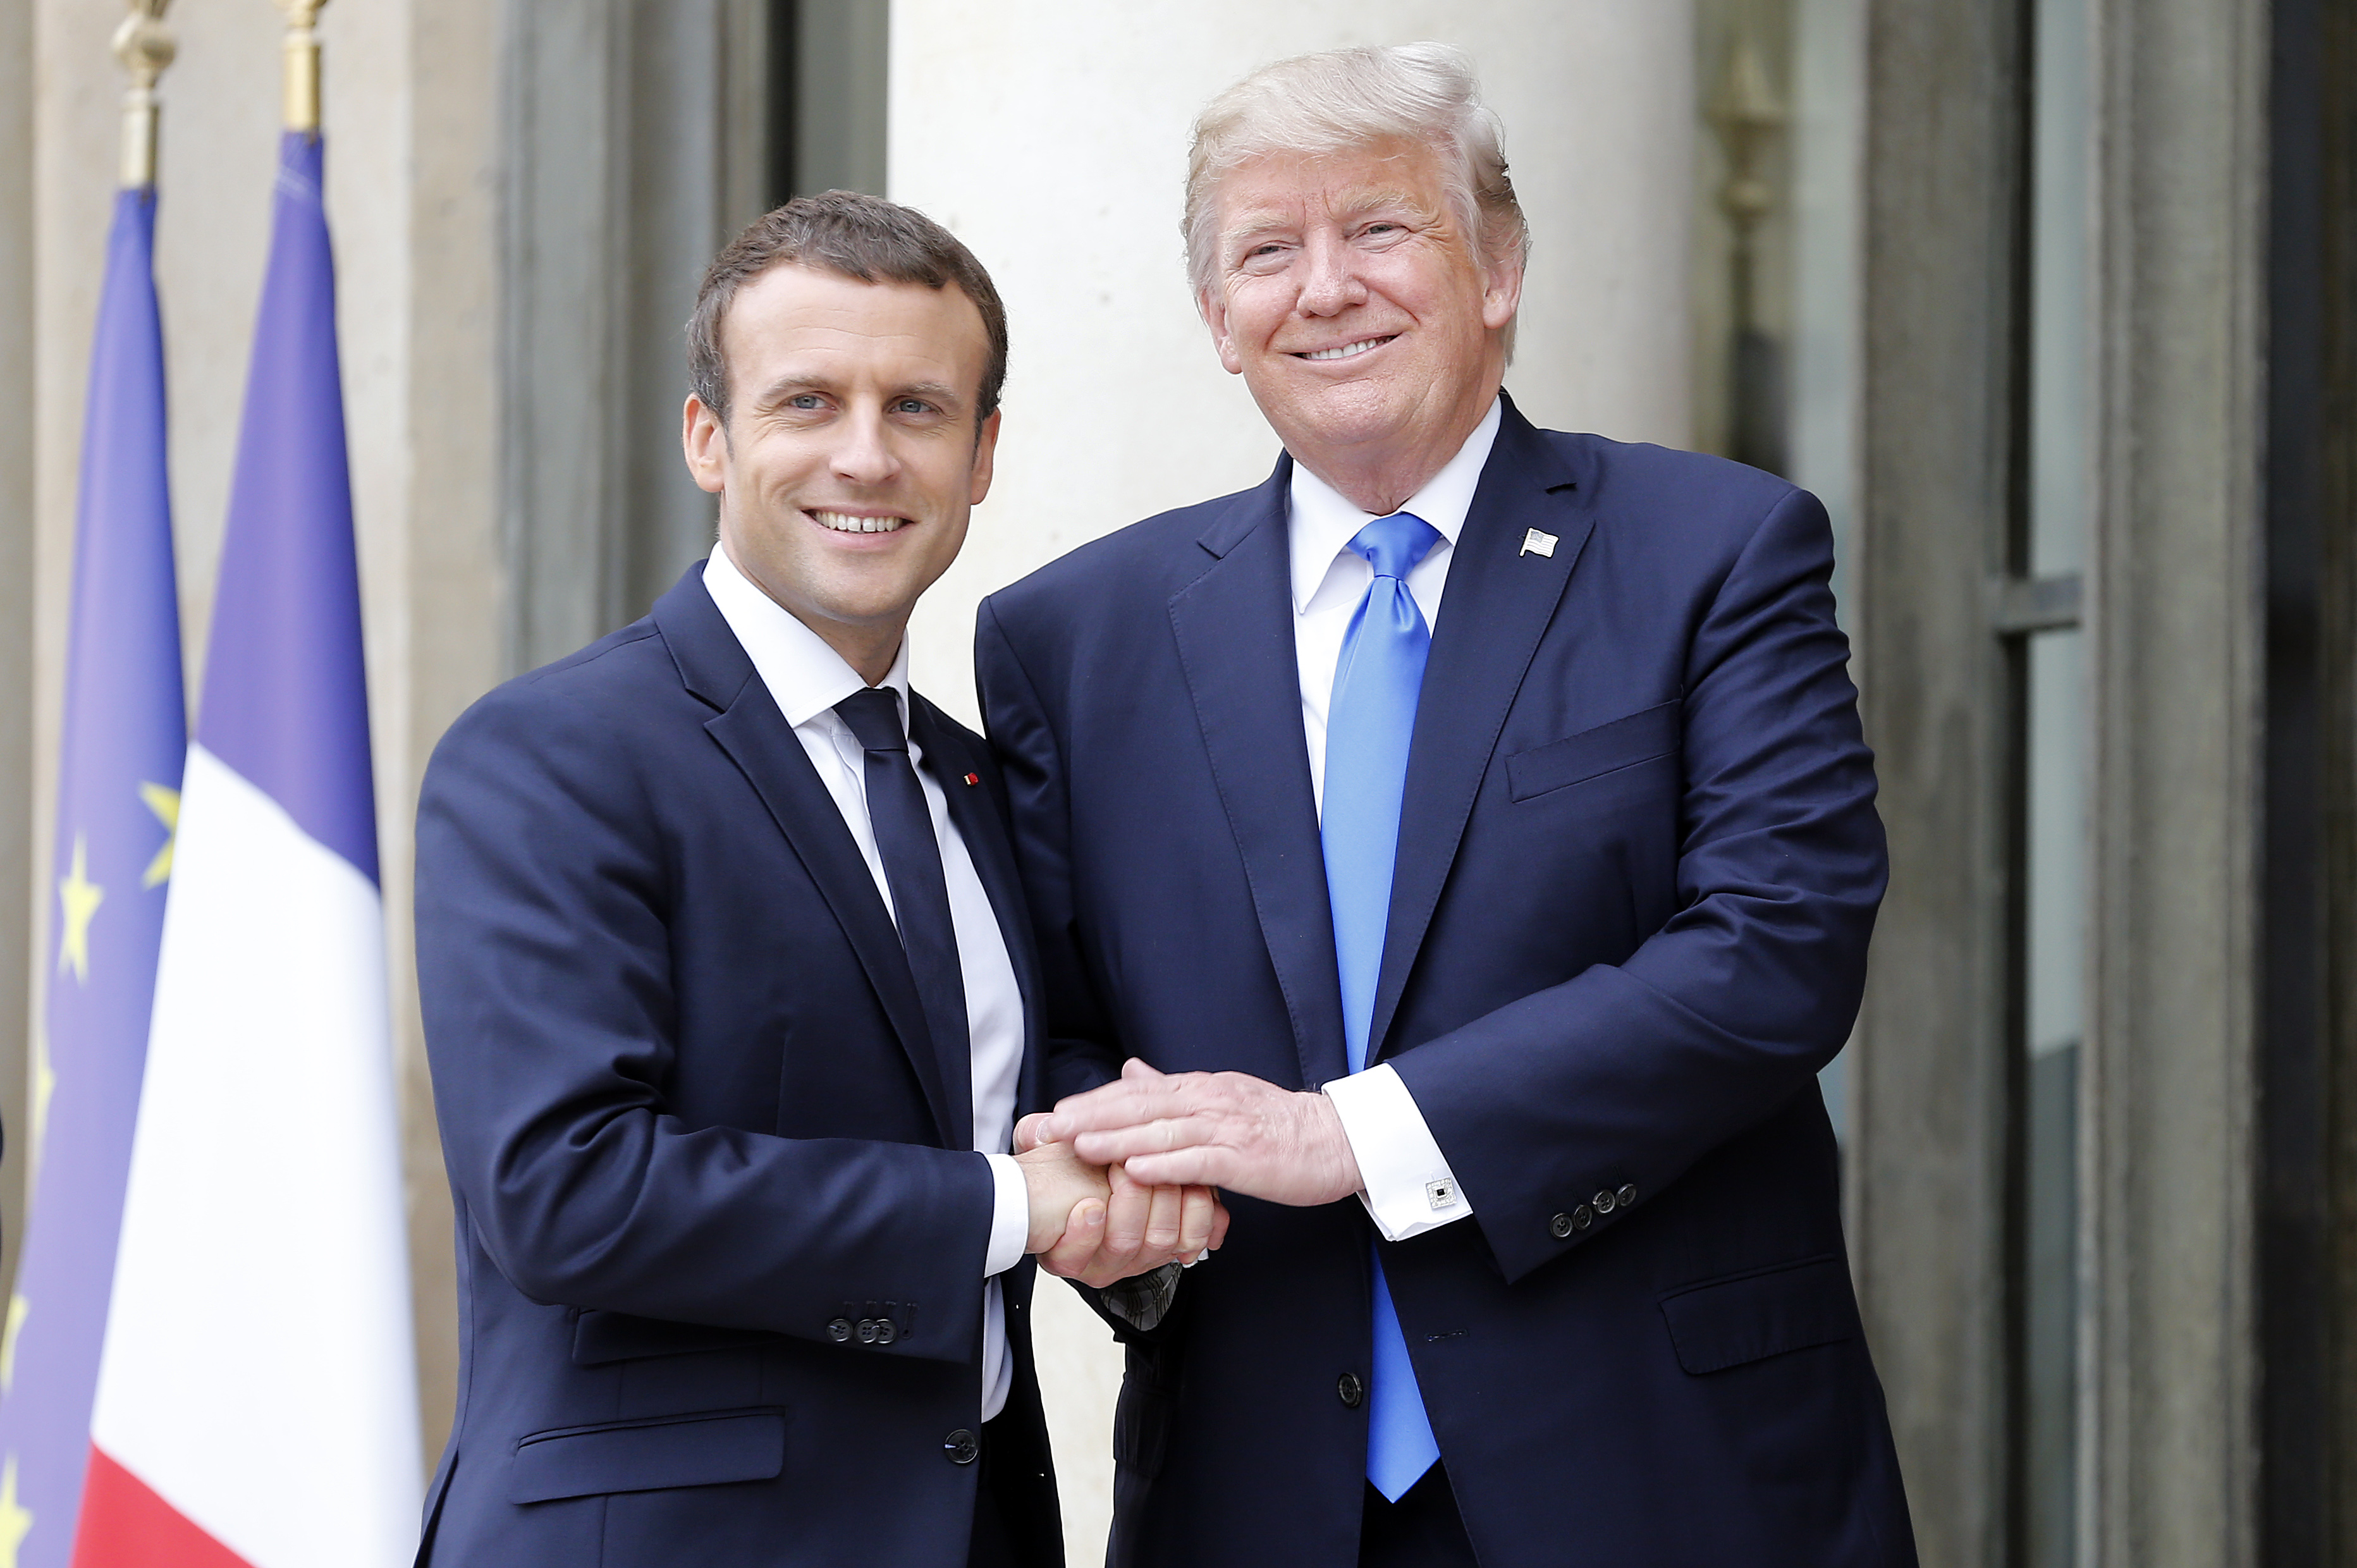 French President Emmanuel Macron welcomes U.S. President Donald Trump prior to a meeting at the Elysee Presidential Palace on July 13, 2017 in Paris, France. (Thierry Chesnot/Getty Images)